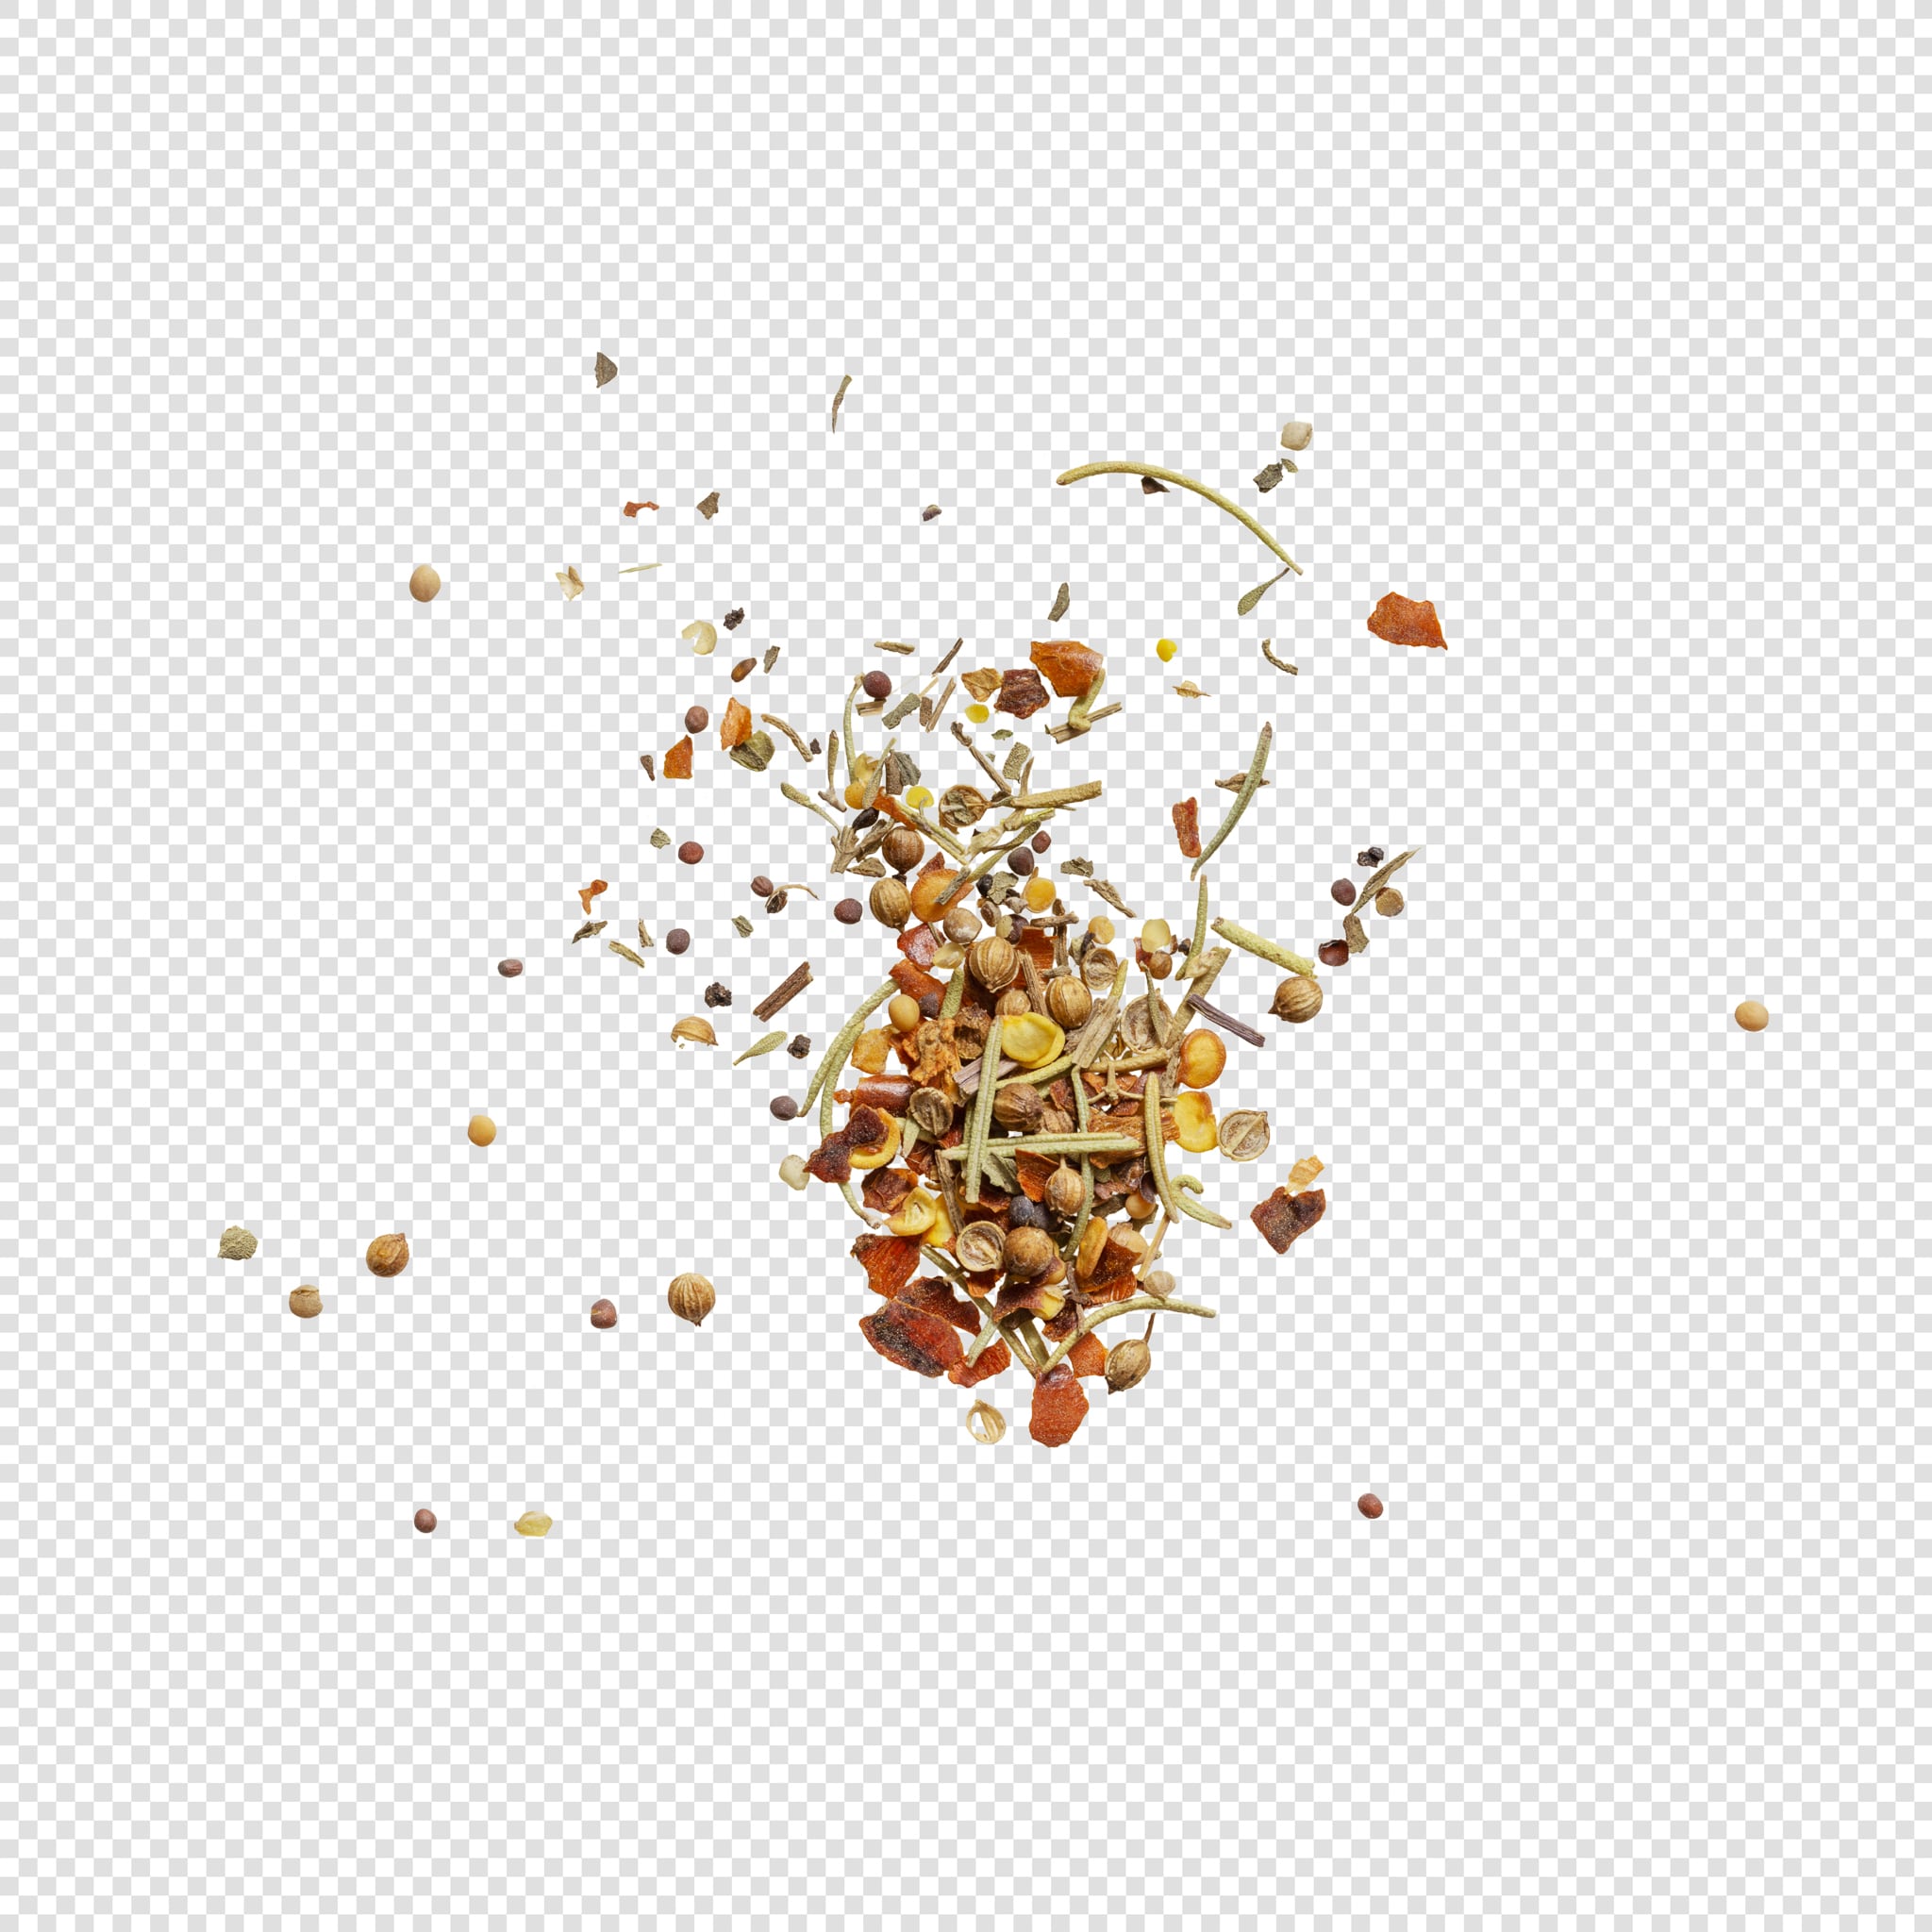 Isolated Spice psd image